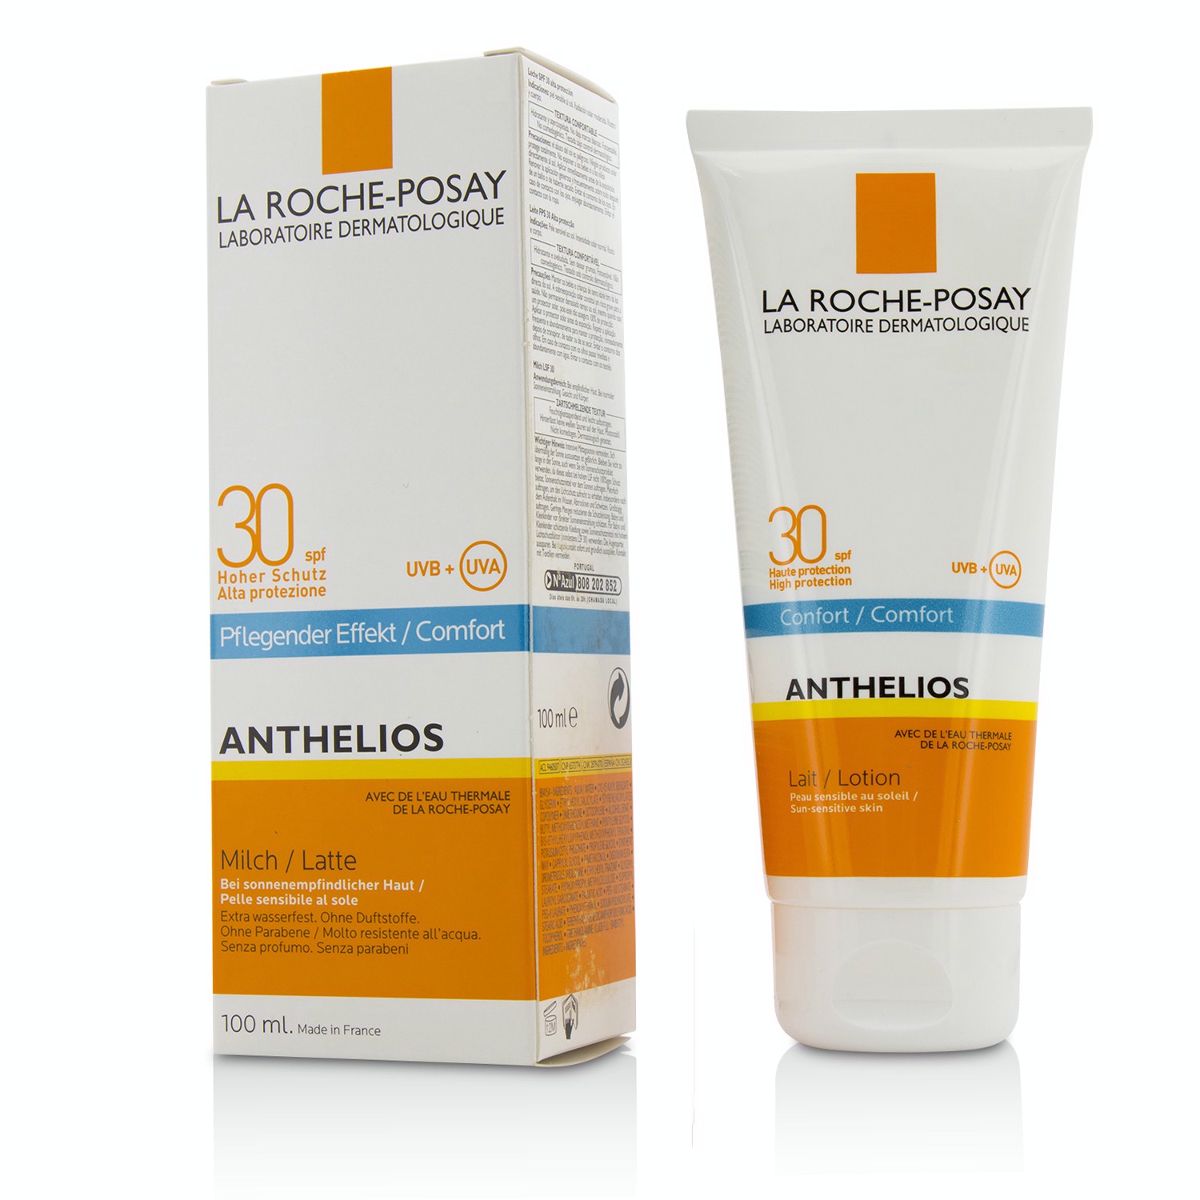 Anthelios Lotion SPF30 (For Face  Body) - Comfort La Roche Posay Image